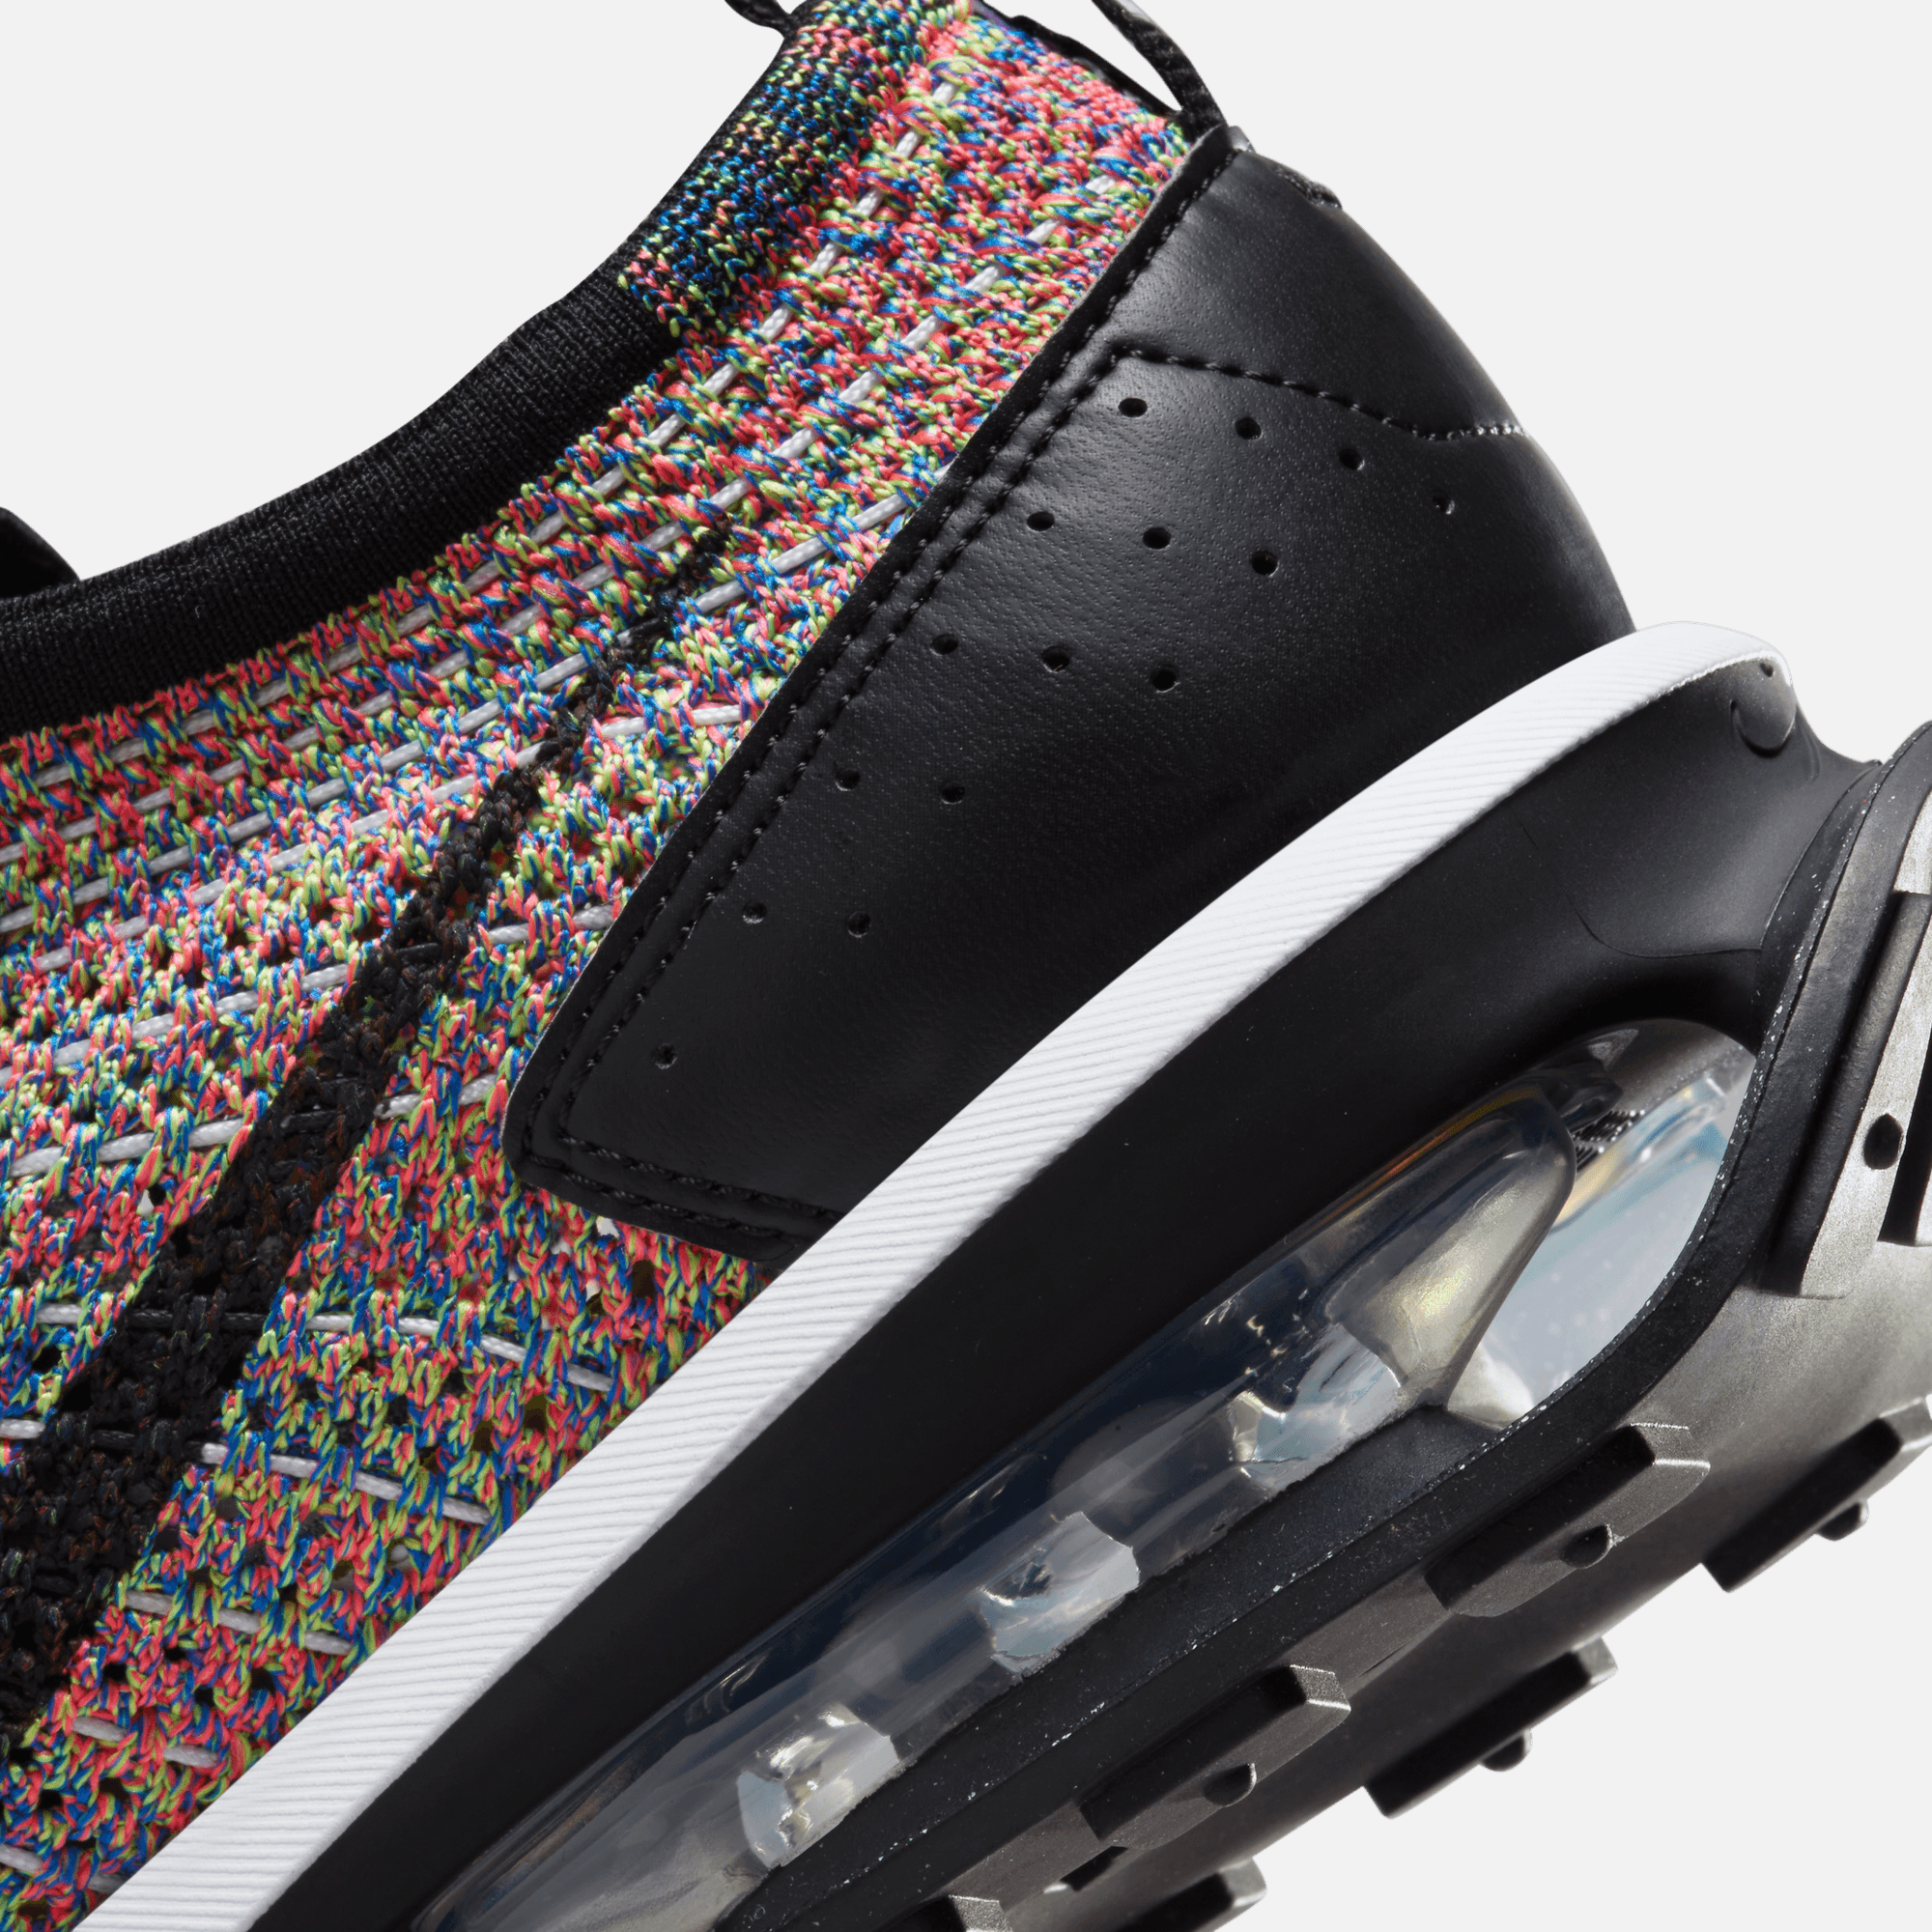 Nike Air Max Flyknit Racer Multicolor Black